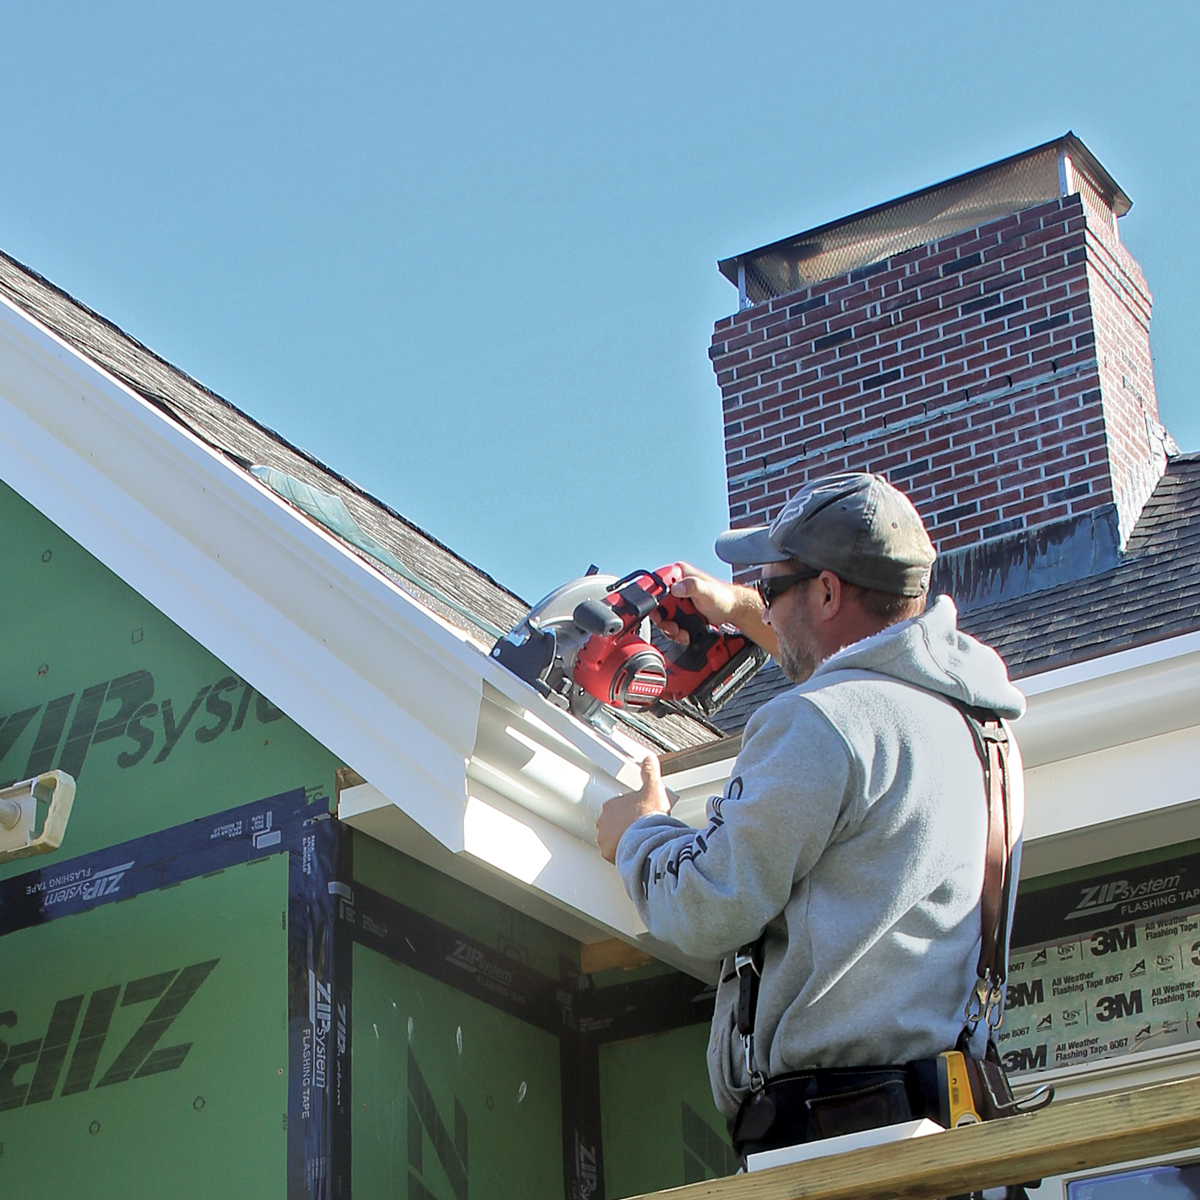 Trim the top. The trimboard that covers the rake’s projection is run long initially and trimmed on the roof.